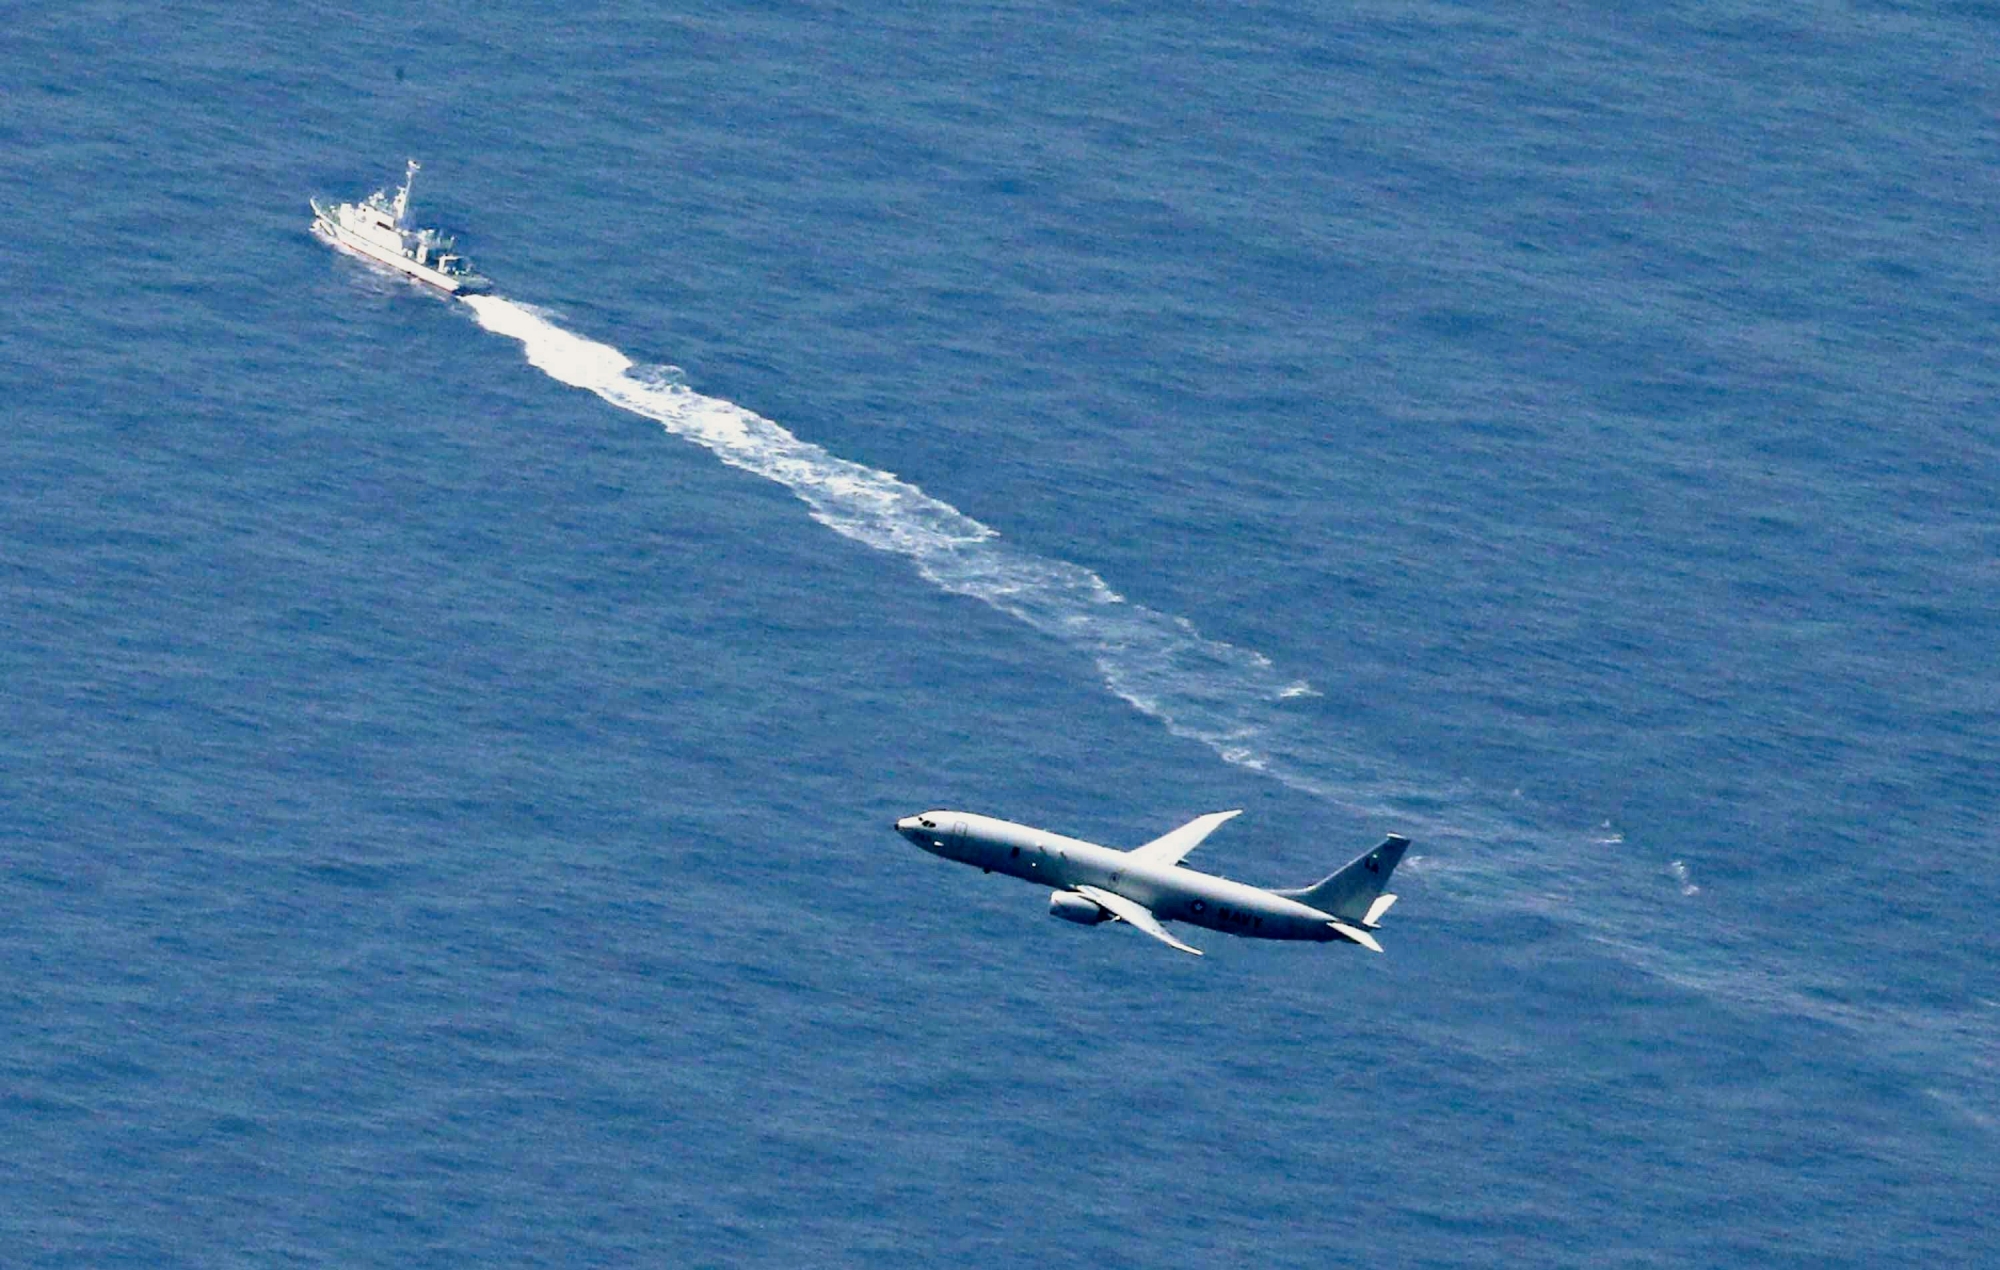 A Japan Coast Guard's vessel and U.S. military plane search for a Japanese fighter jet, in the waters off Aomori, northern Japan, Wednesday, April 10, 2019. The Japanese air force F-35 stealth fighter crashed into the Pacific Ocean during a night training flight and parts of the jet were recovered, the defense ministry said Wednesday. (Kyodo News via AP) Japan Fighter Jet